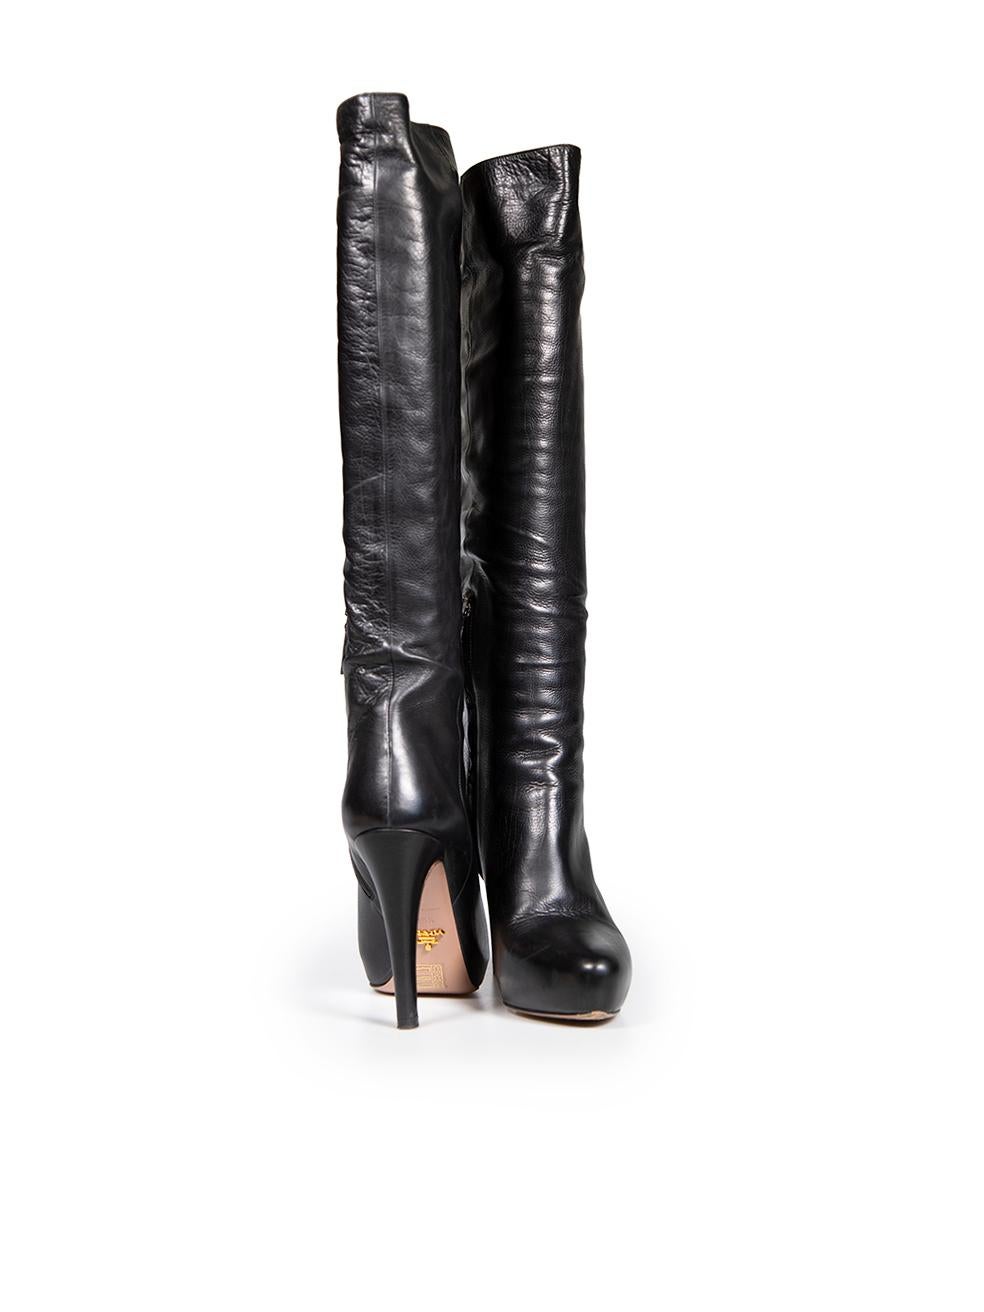 Prada Black Leather Platform Knee Length Boots Size IT 39.5 In Good Condition For Sale In London, GB